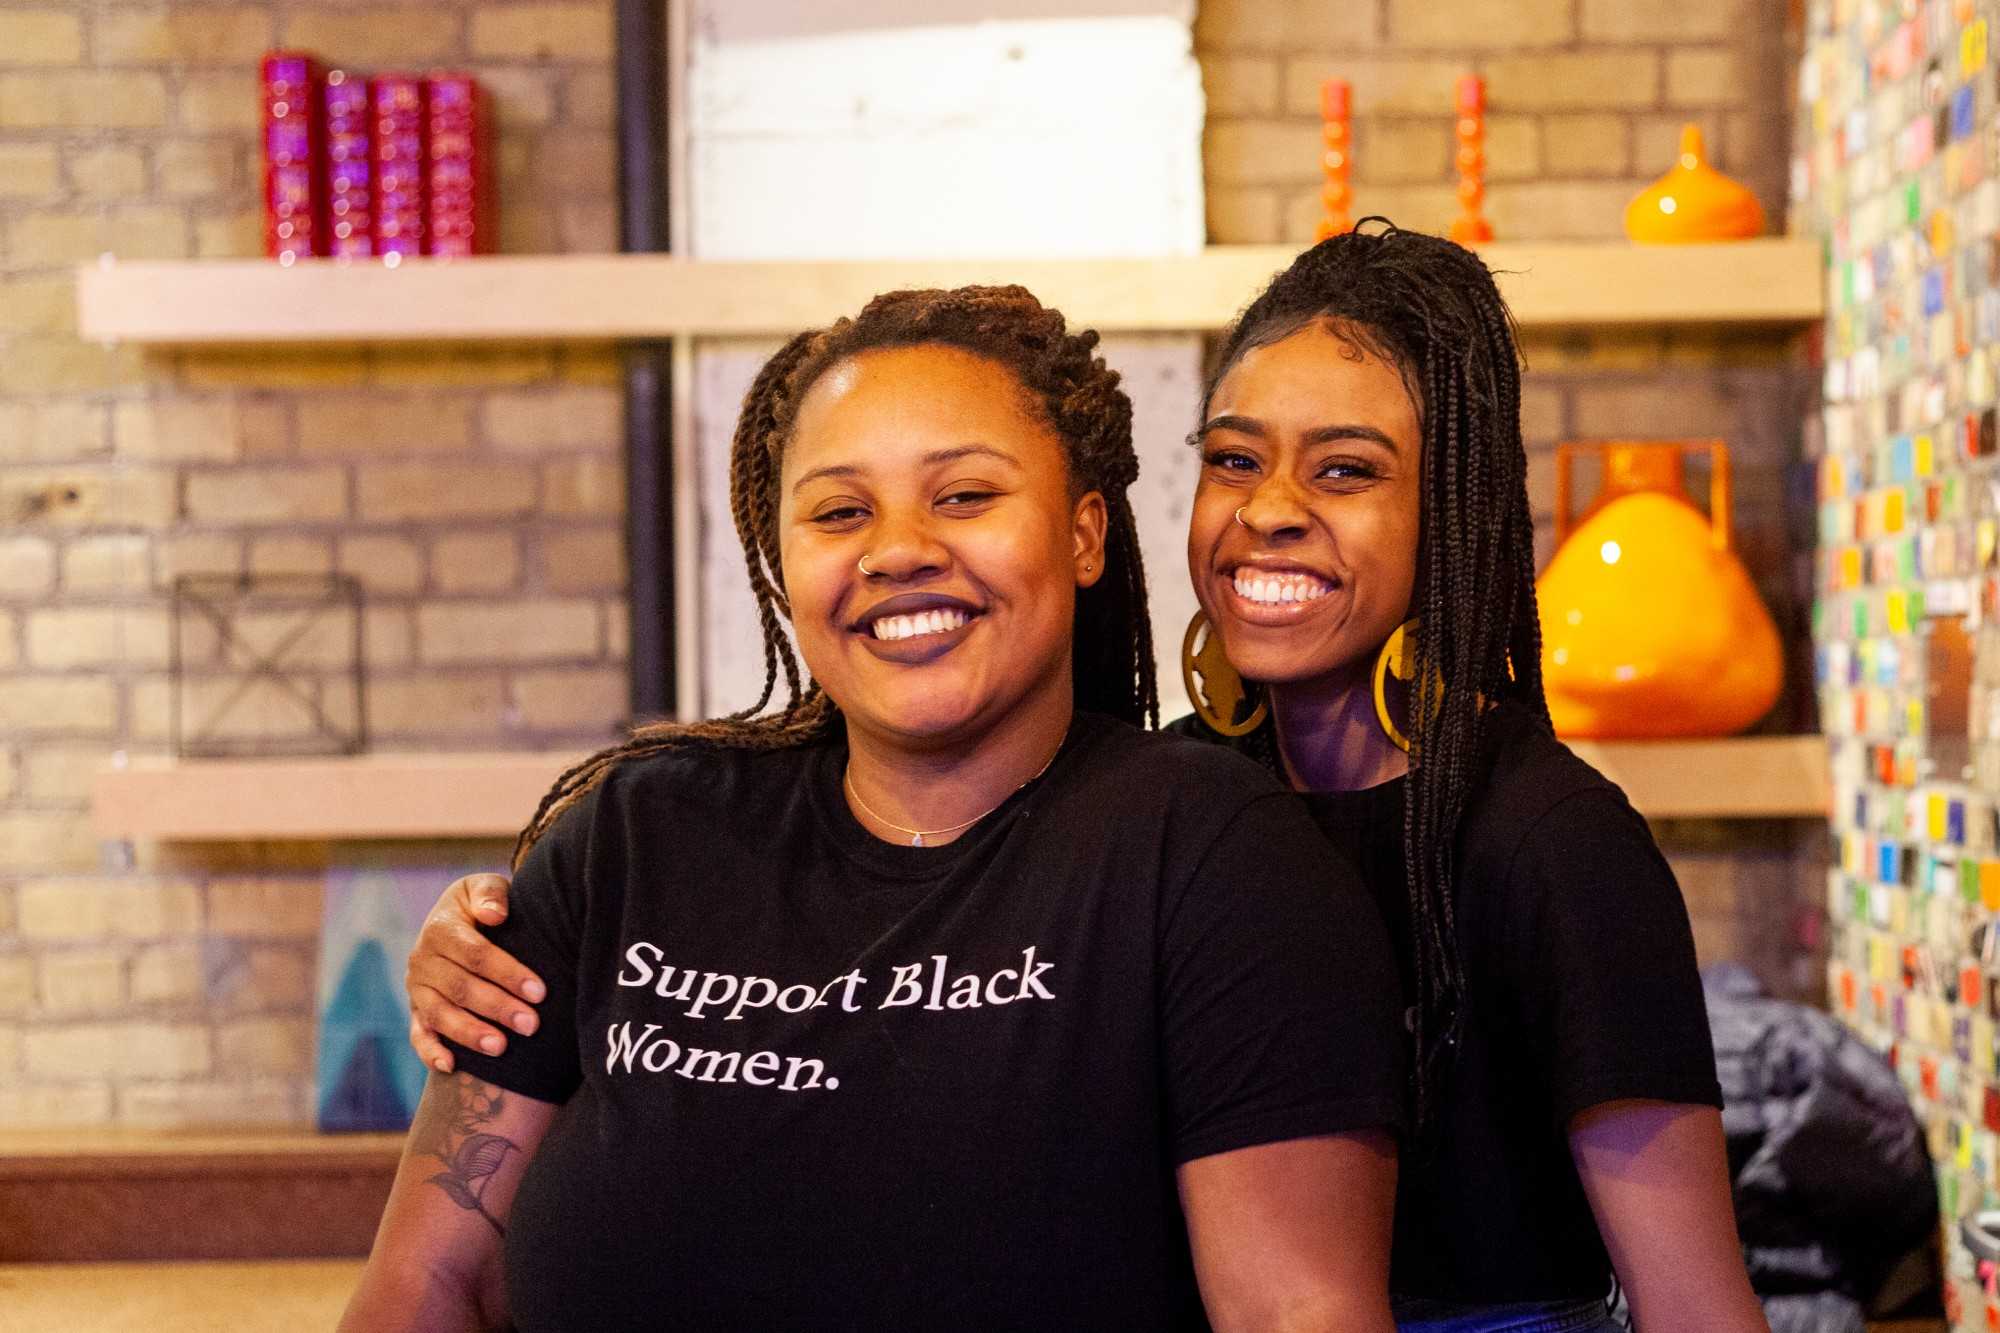 Co-organizers ZaNia Coleman, left, and Ricki Williams pose for a portrait at the Tangible Thoughts Open Mic event at A-Mill Artist Lofts on Saturday, Feb. 15. The recurring event serves as a platform to highlight Black thought and expression in the Twin Cities.